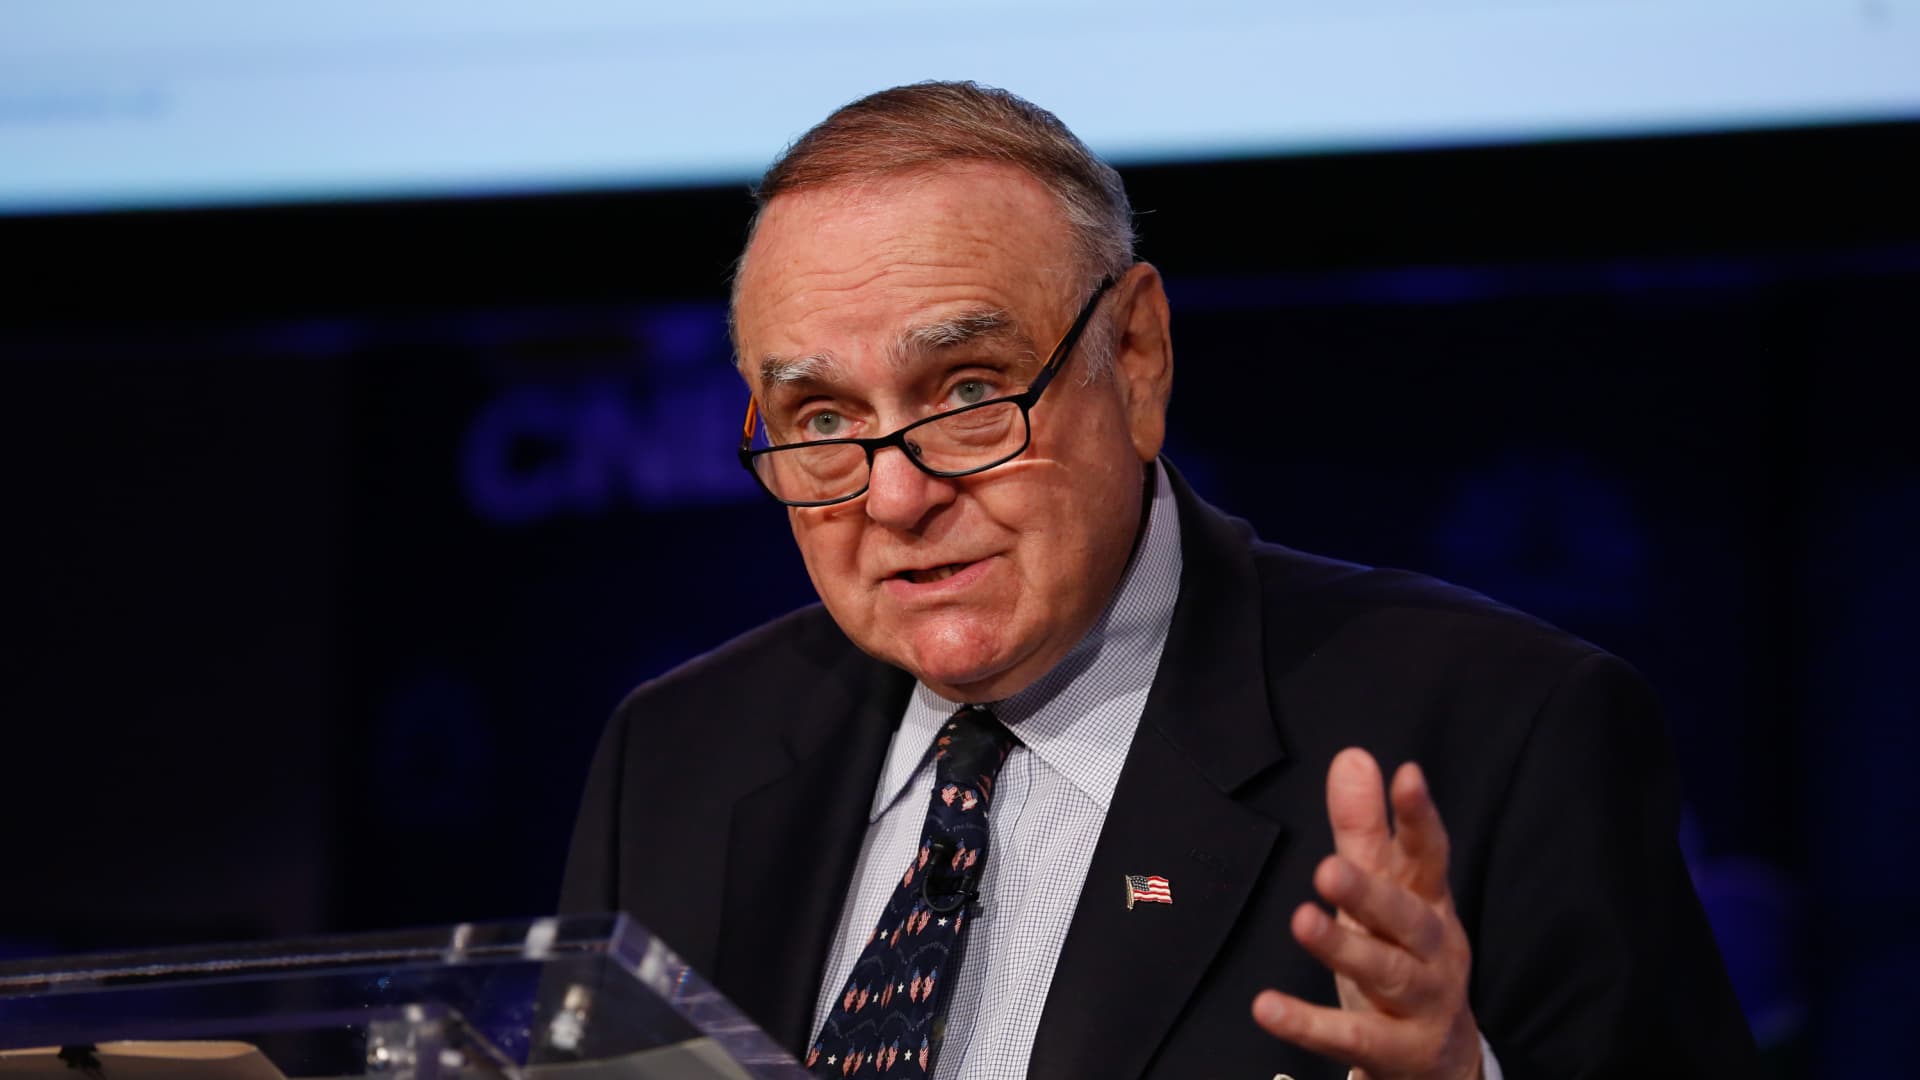 Leon Cooperman says roughly 15% of his family office assets are in energy stocks